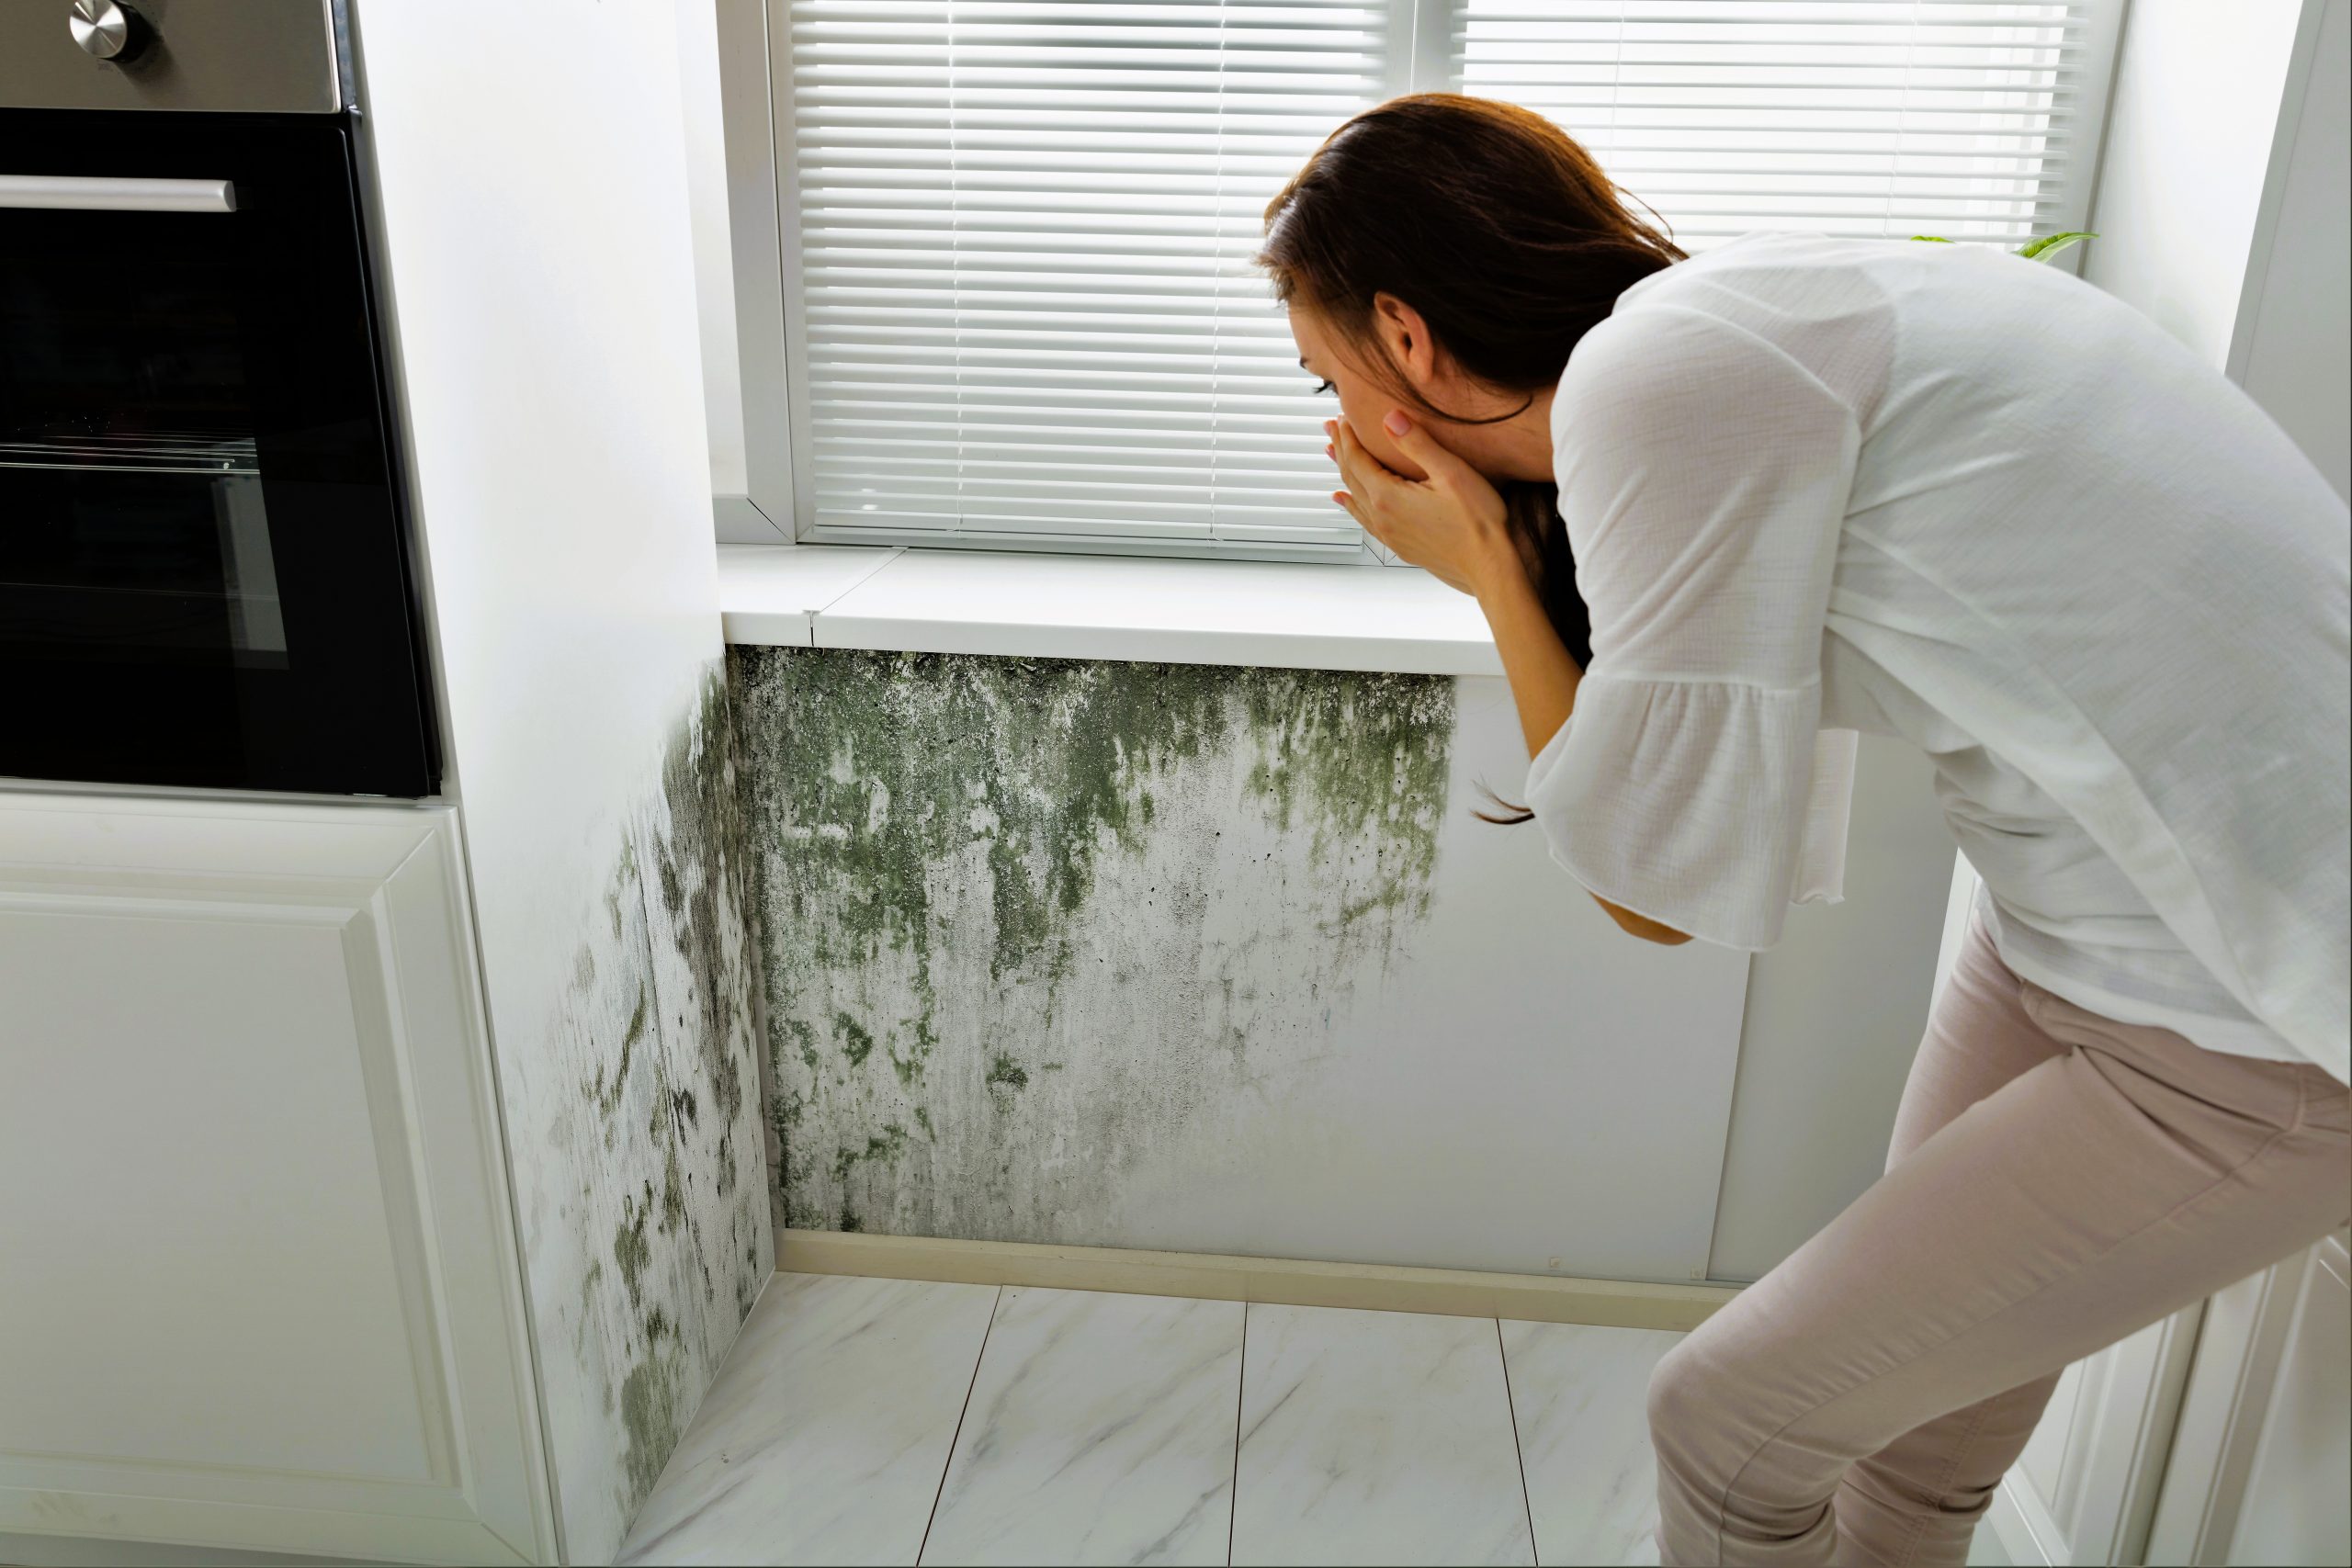 Side View Of A Young Woman Looking At Mold On Wall